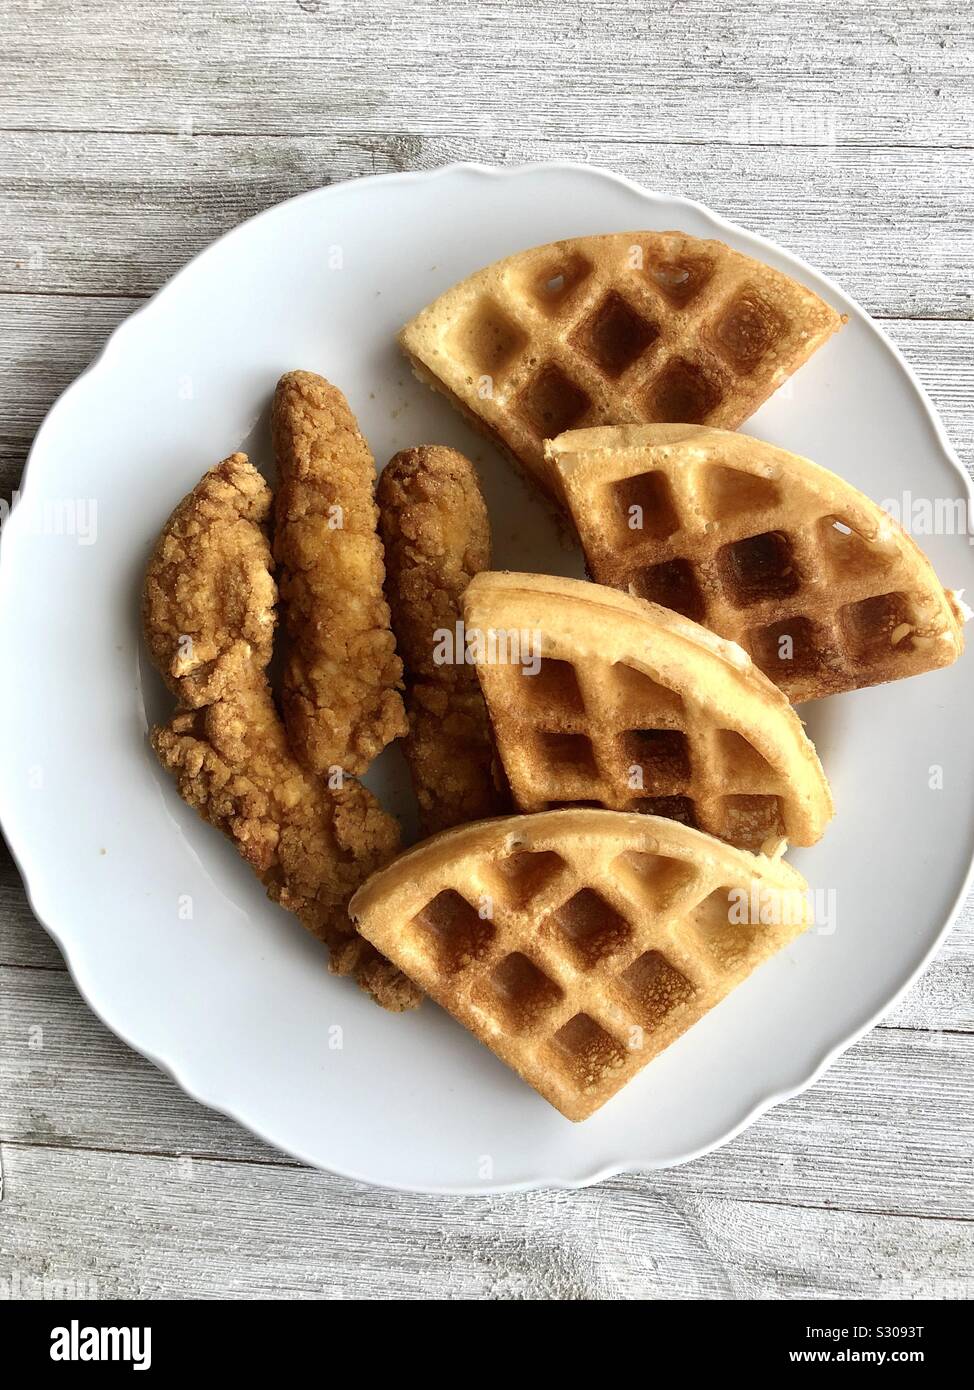 Chicken and waffles Stock Photo